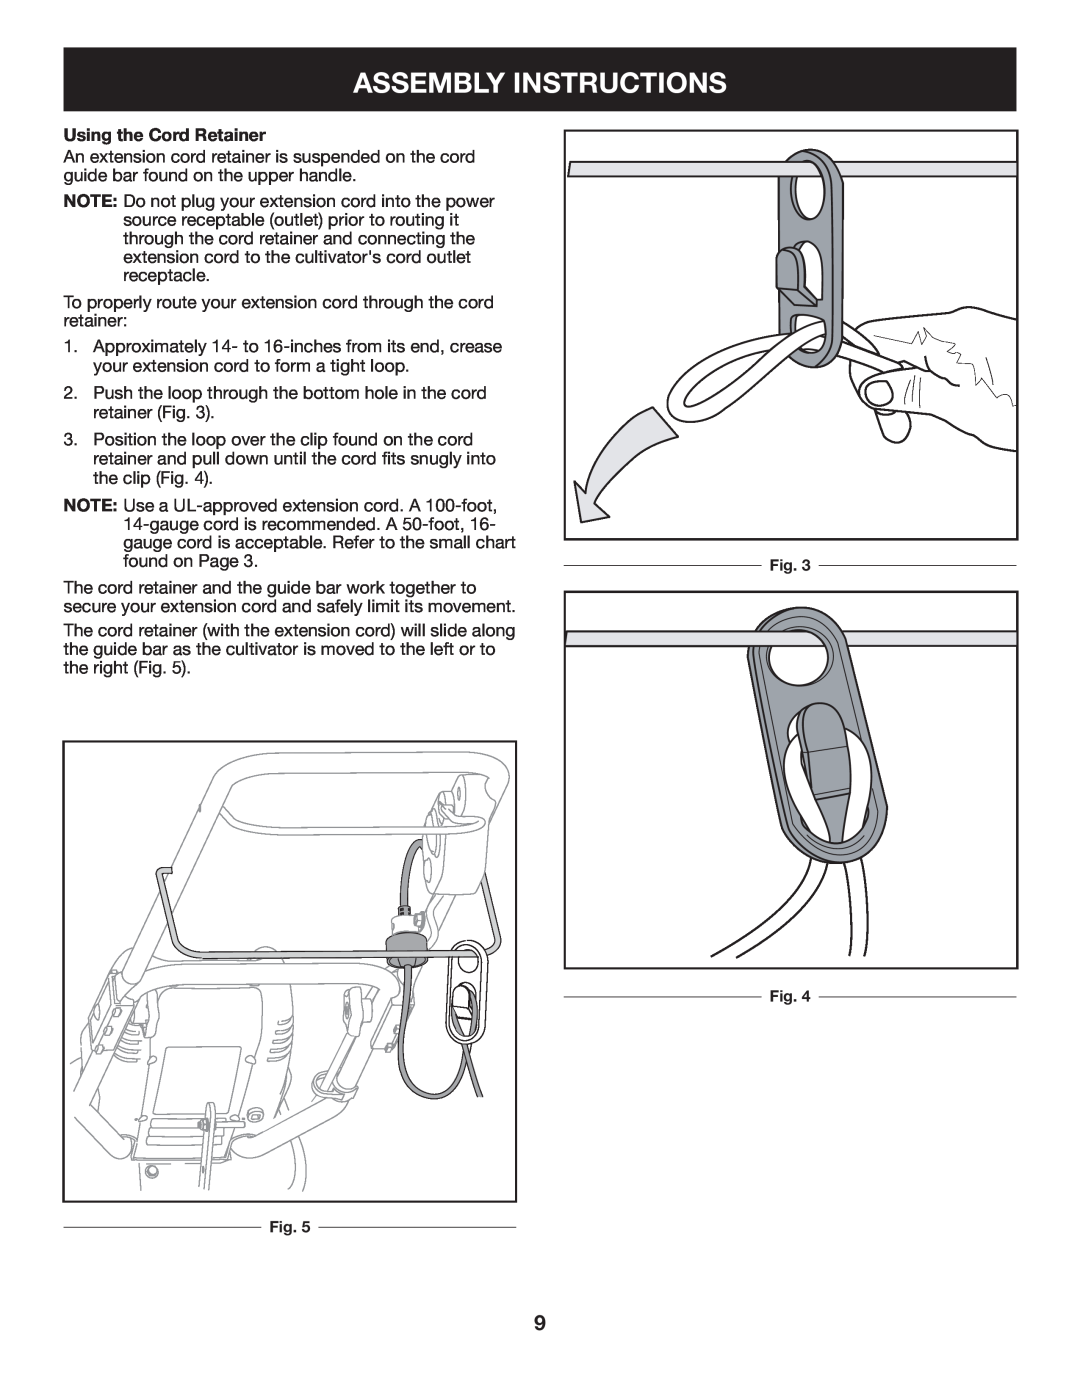 Craftsman 316.2926 manual Assembly Instructions, Using the Cord Retainer 